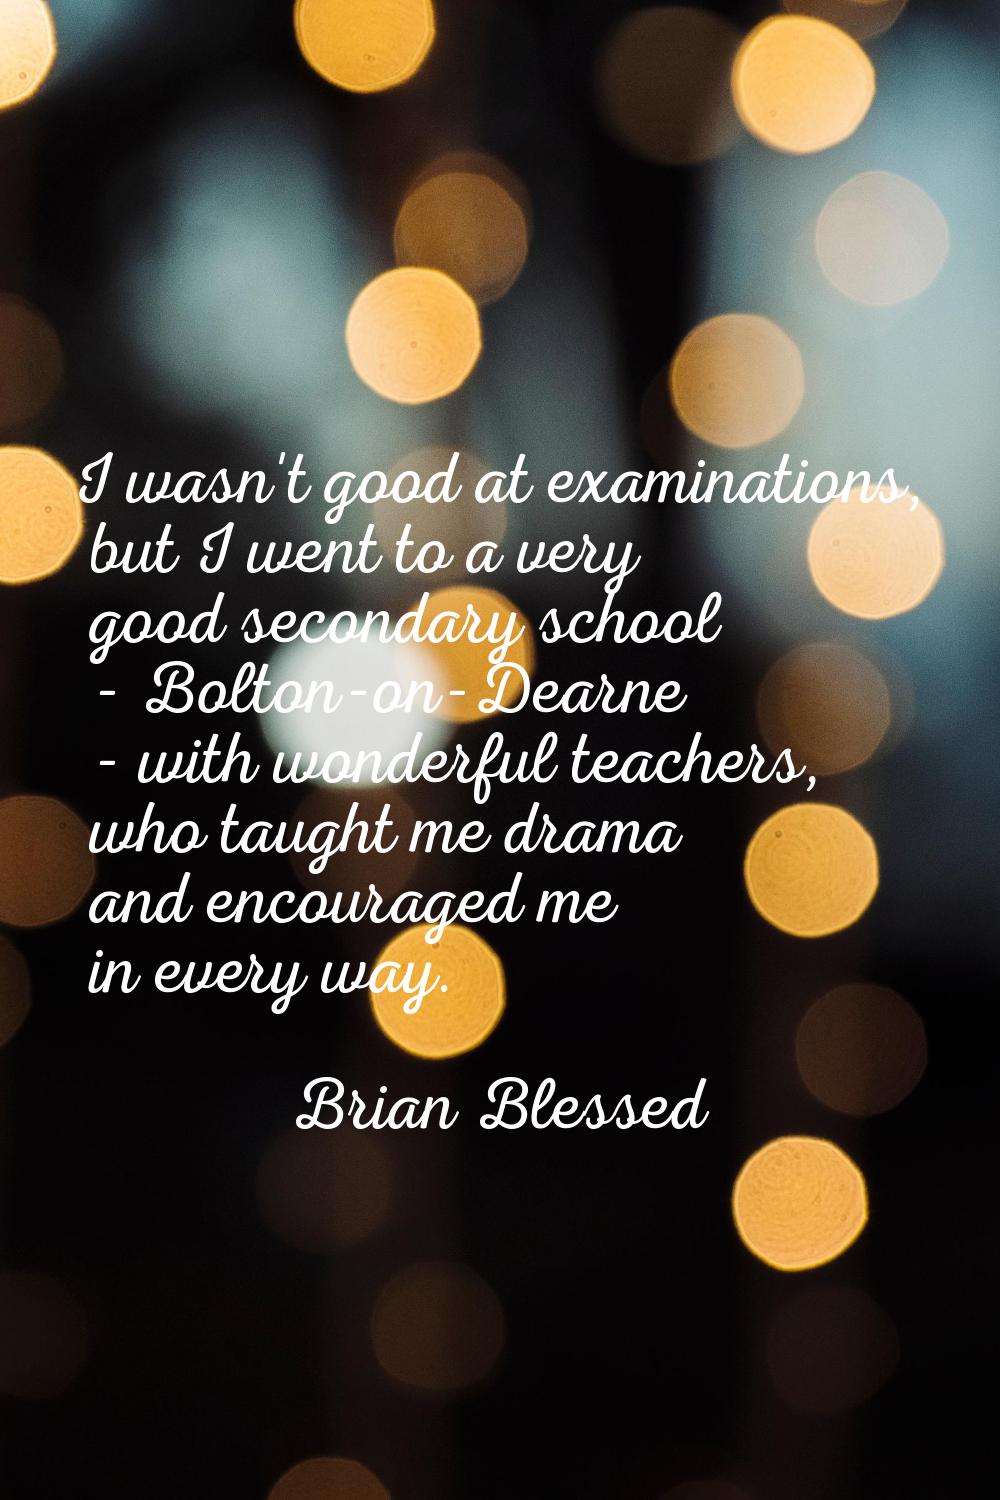 I wasn't good at examinations, but I went to a very good secondary school - Bolton-on-Dearne - with